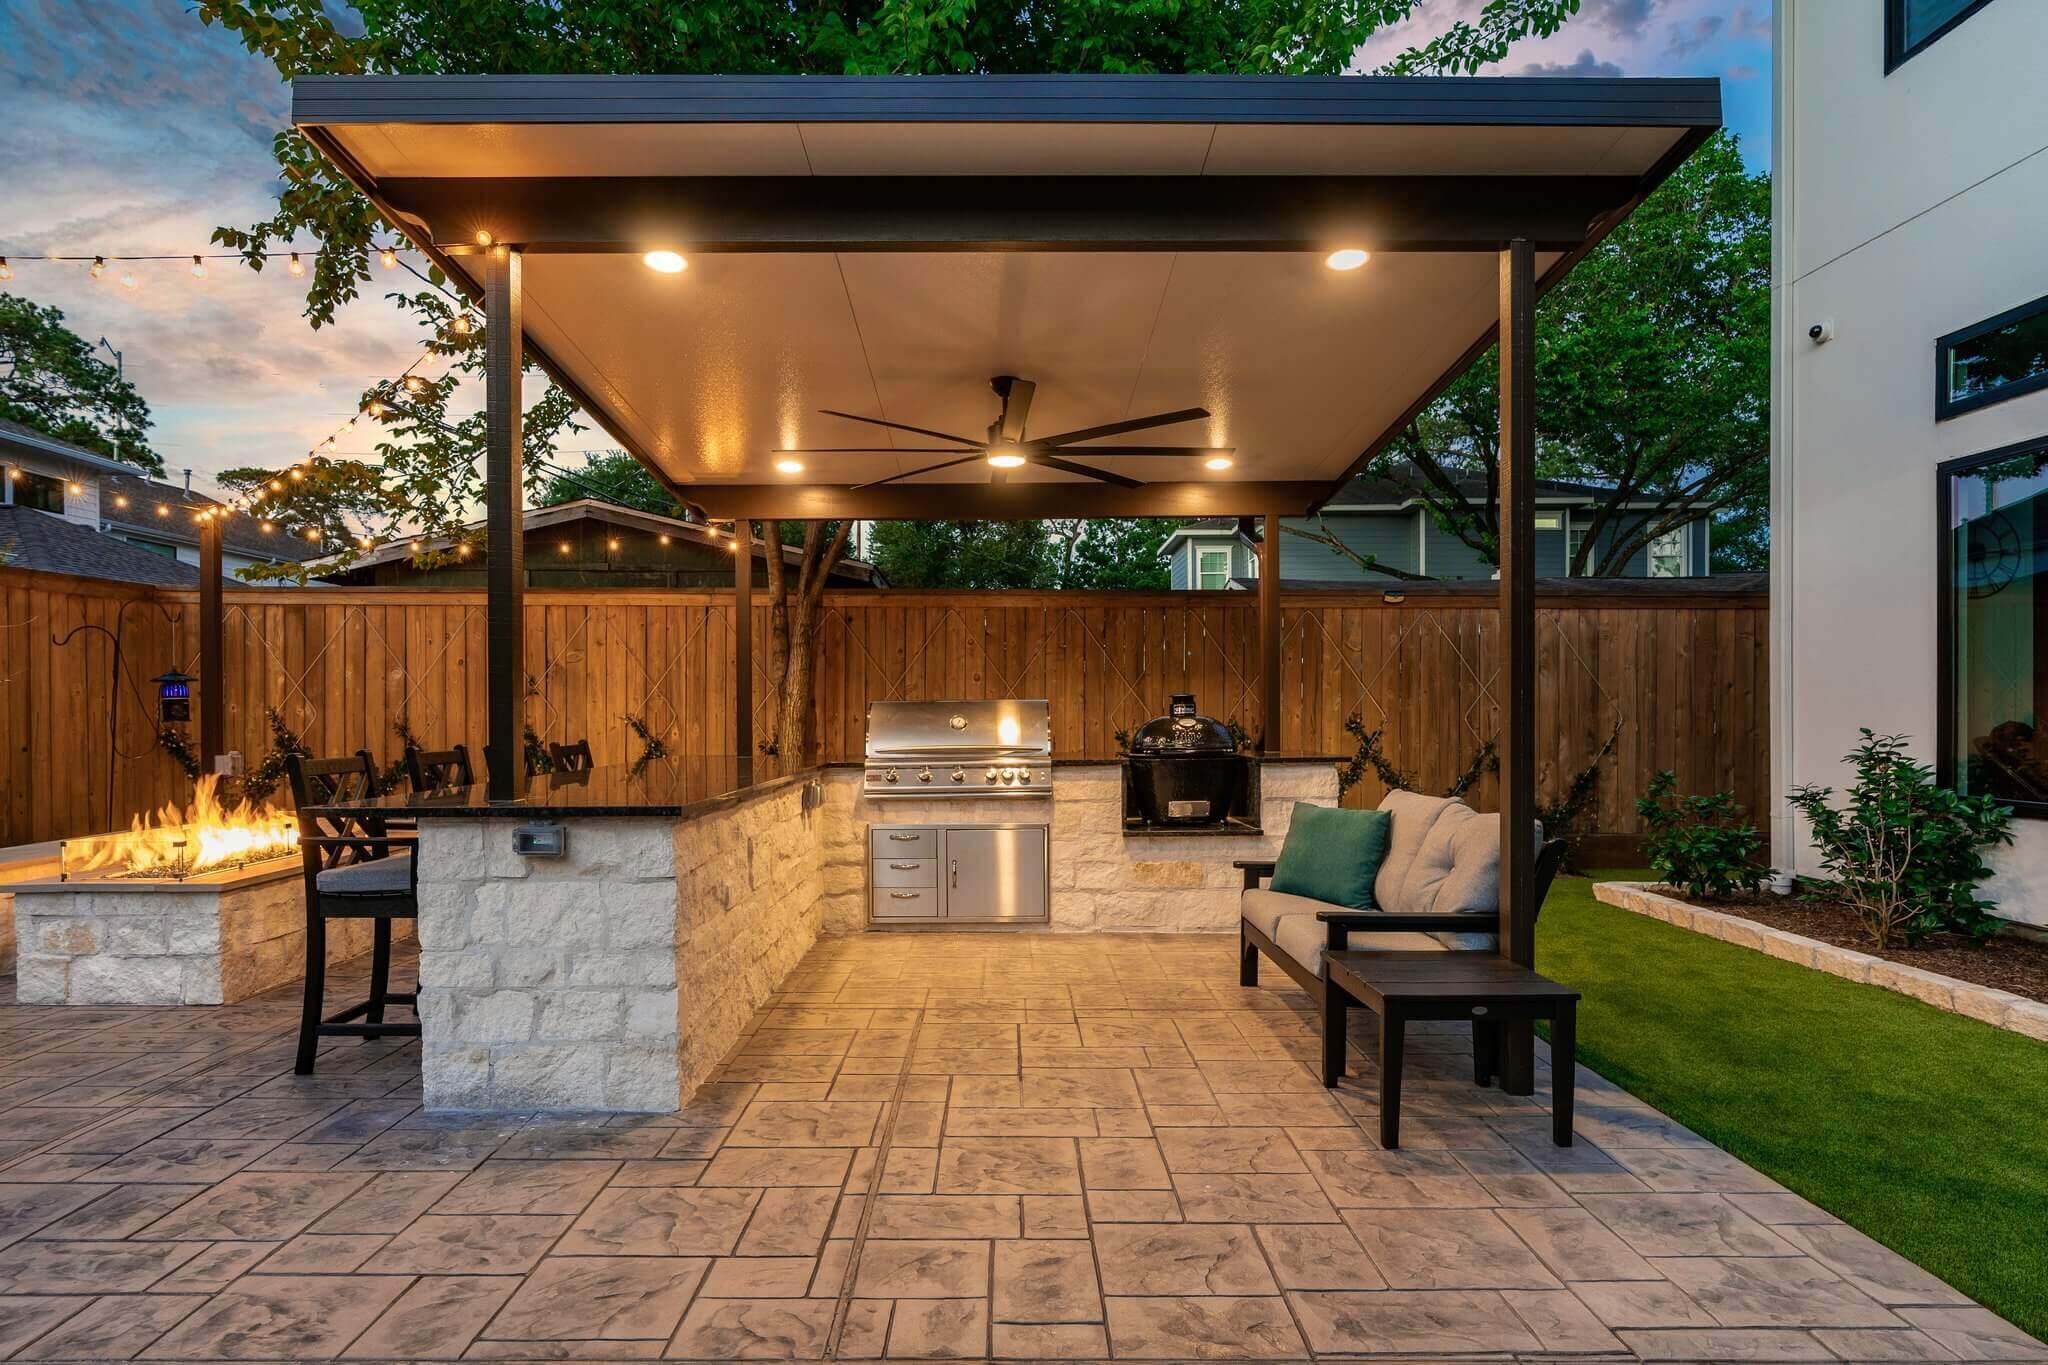 Aluminum patio cover with grilling station countertop and stamped concrete patio design idea